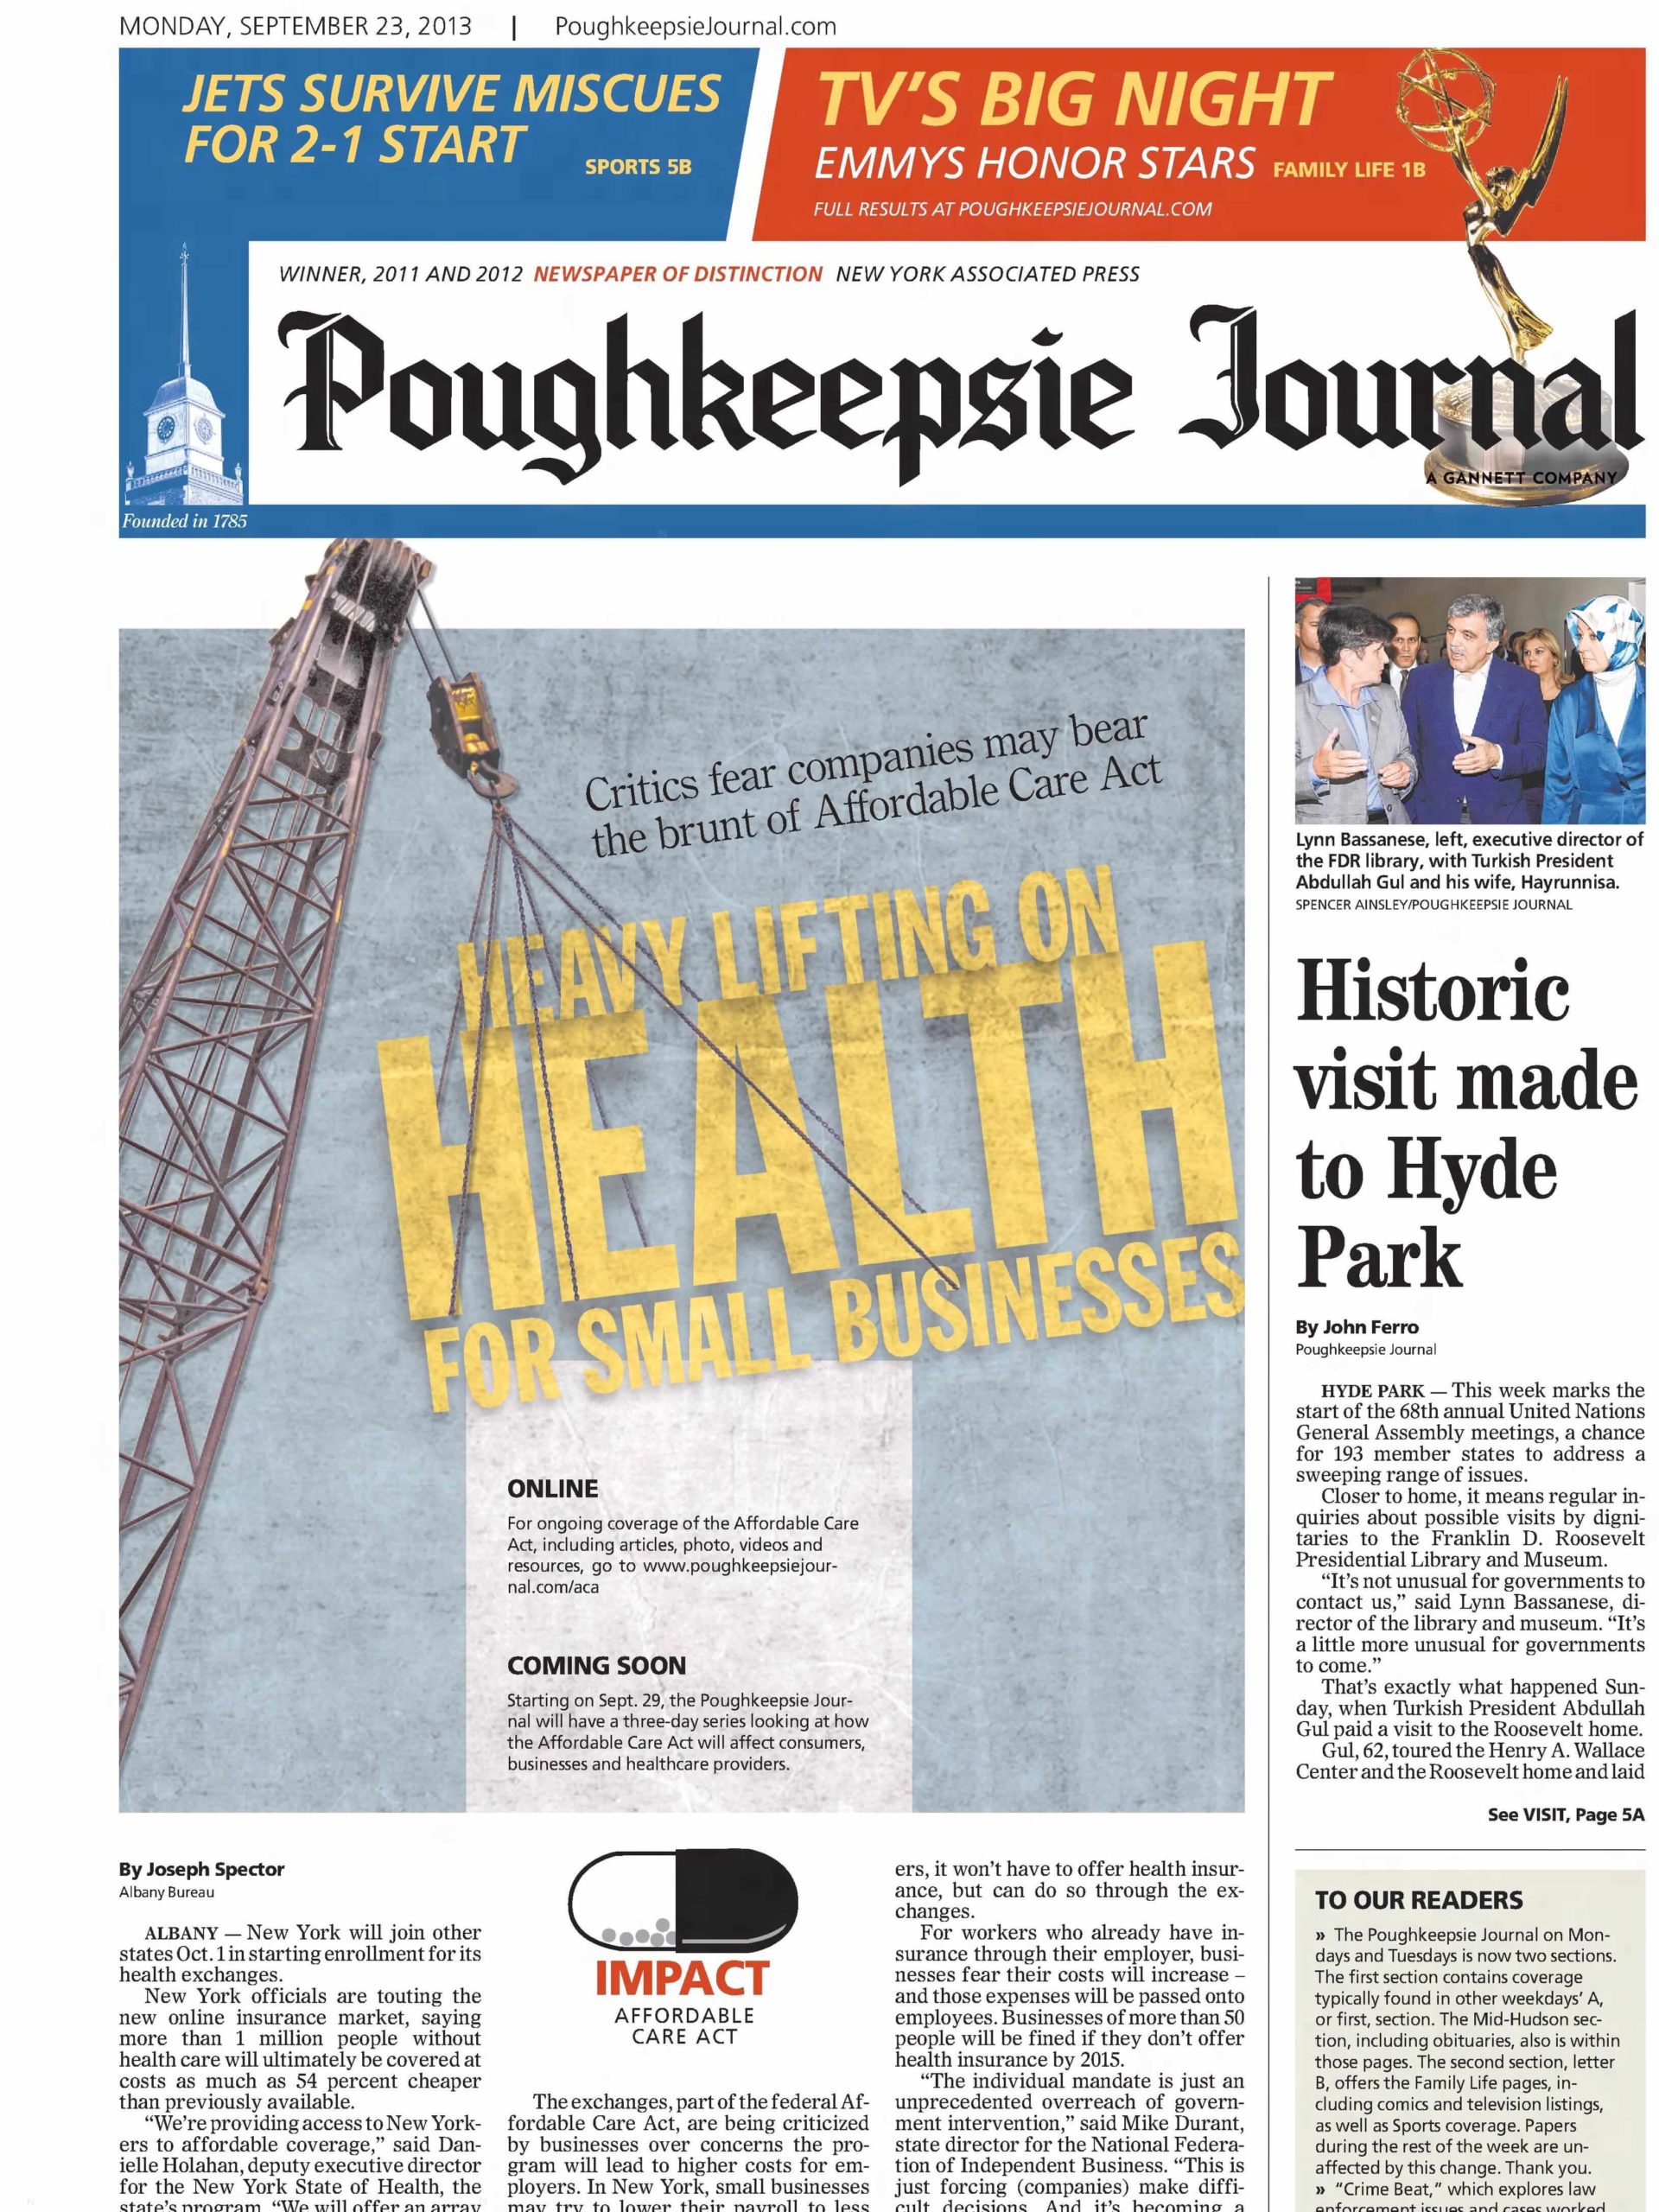 New York newspapers 53 The Poughkeepsie Journal scaled